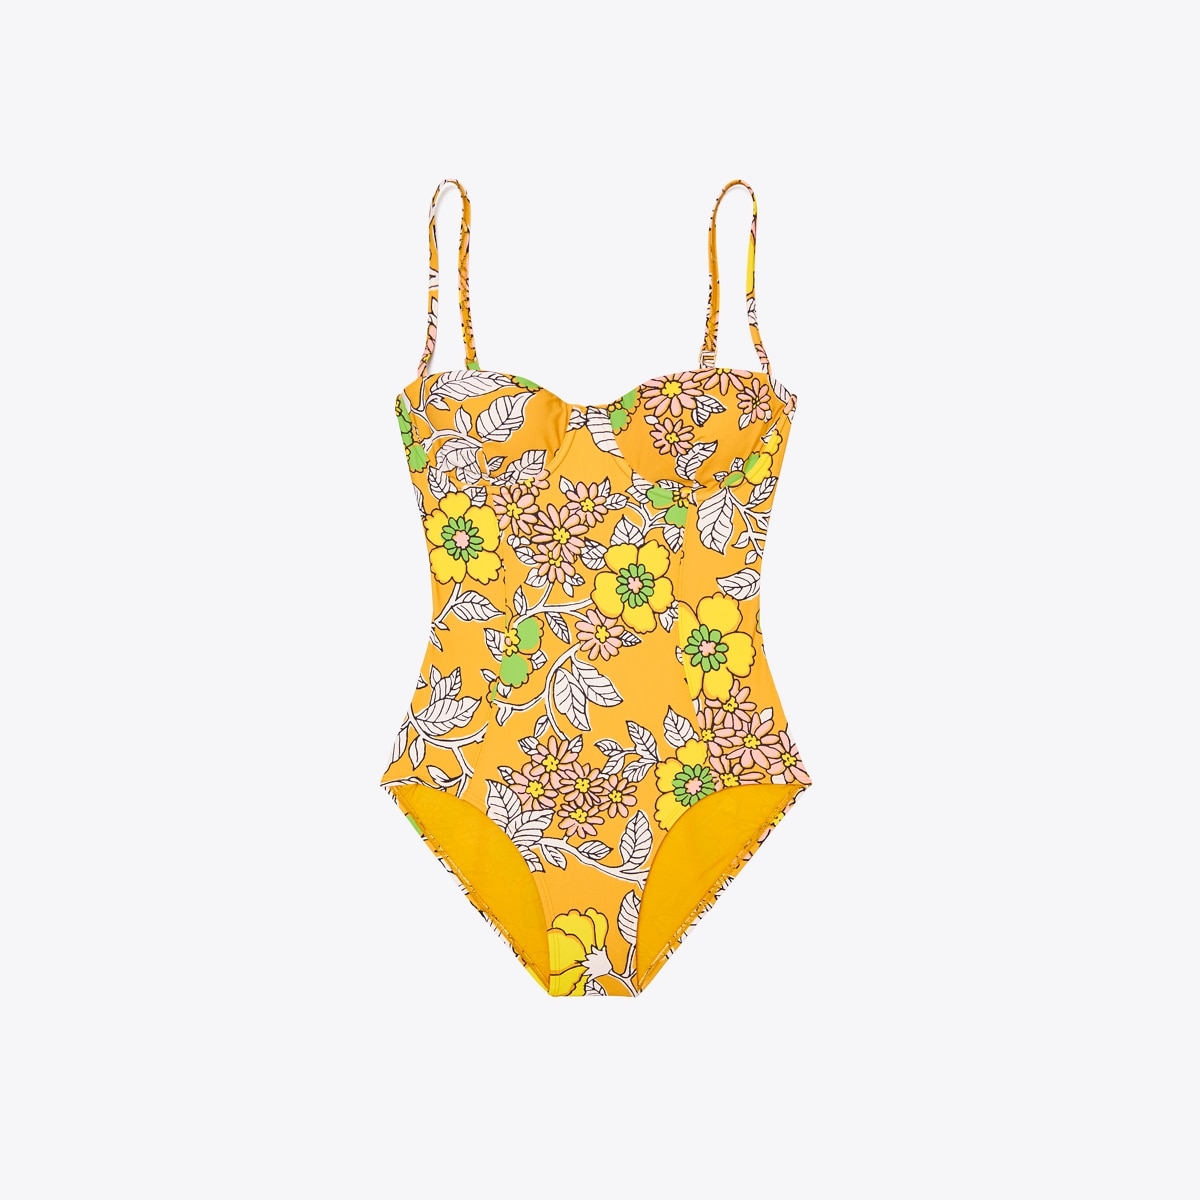 Tory Burch Printed Underwire One-Piece Swimsuit | Tory Burch